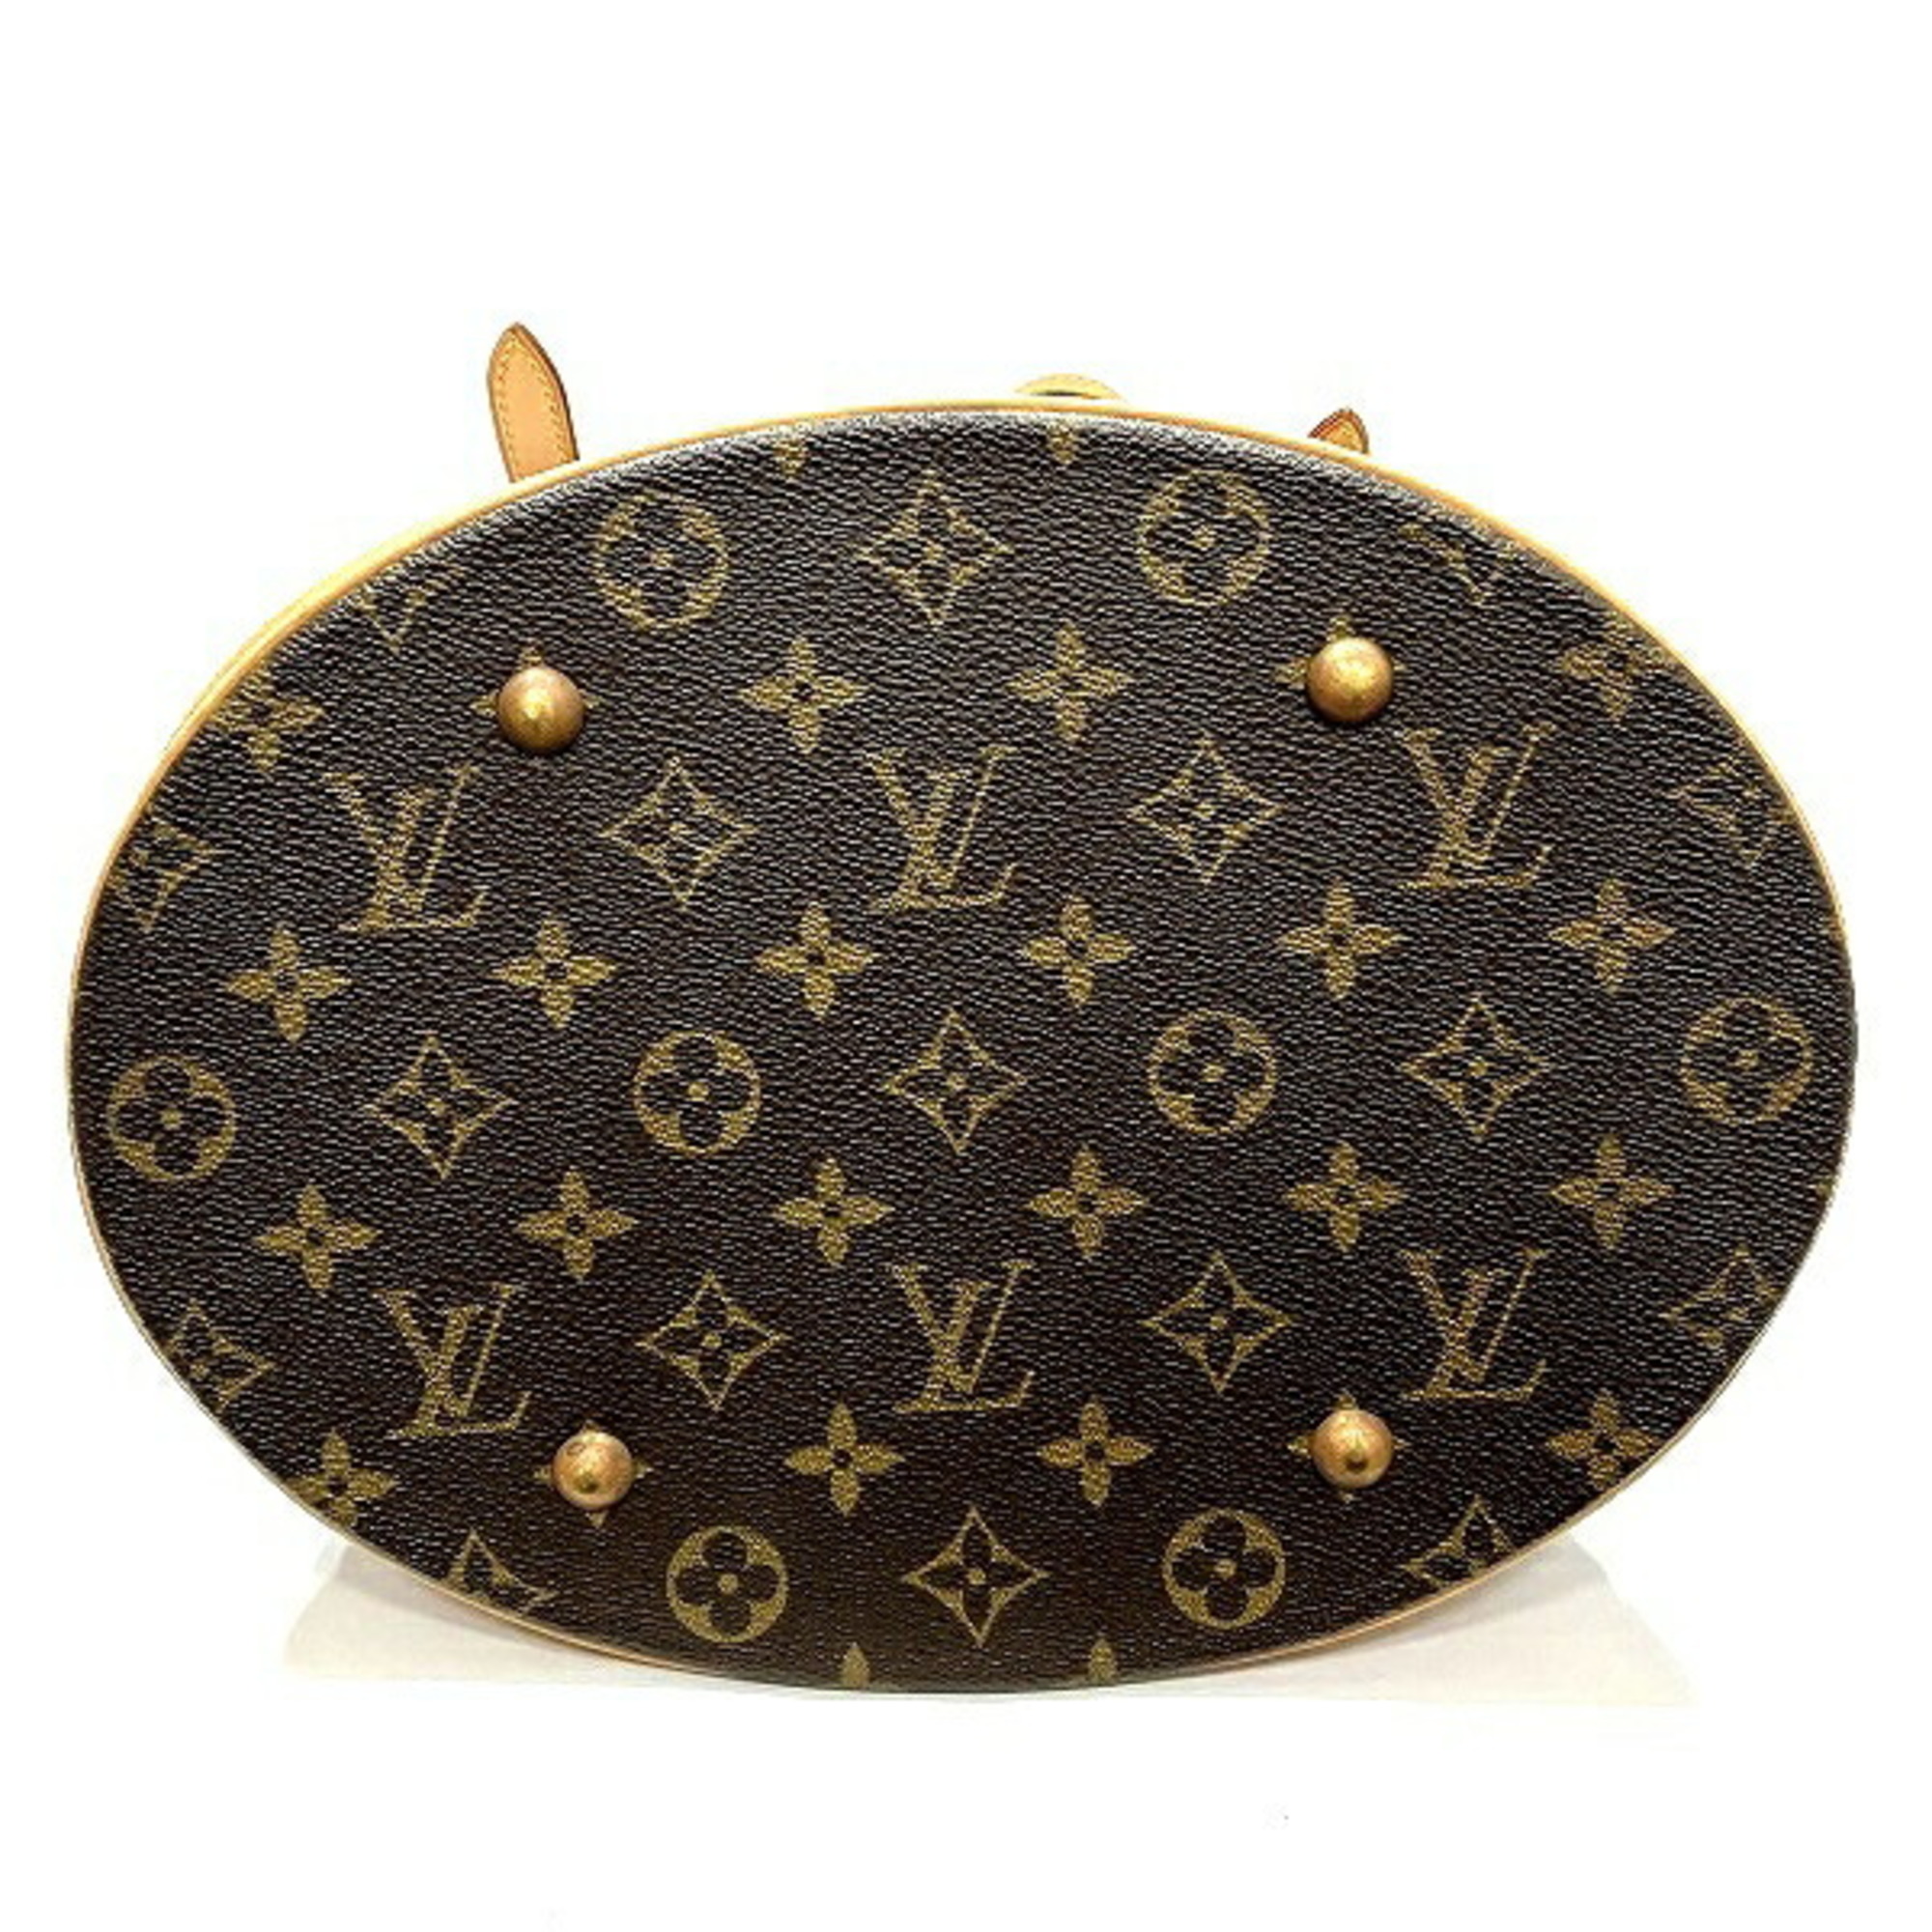 Louis Vuitton Monogram Bucket GM M42236 Bag with Pouch Tote Women's